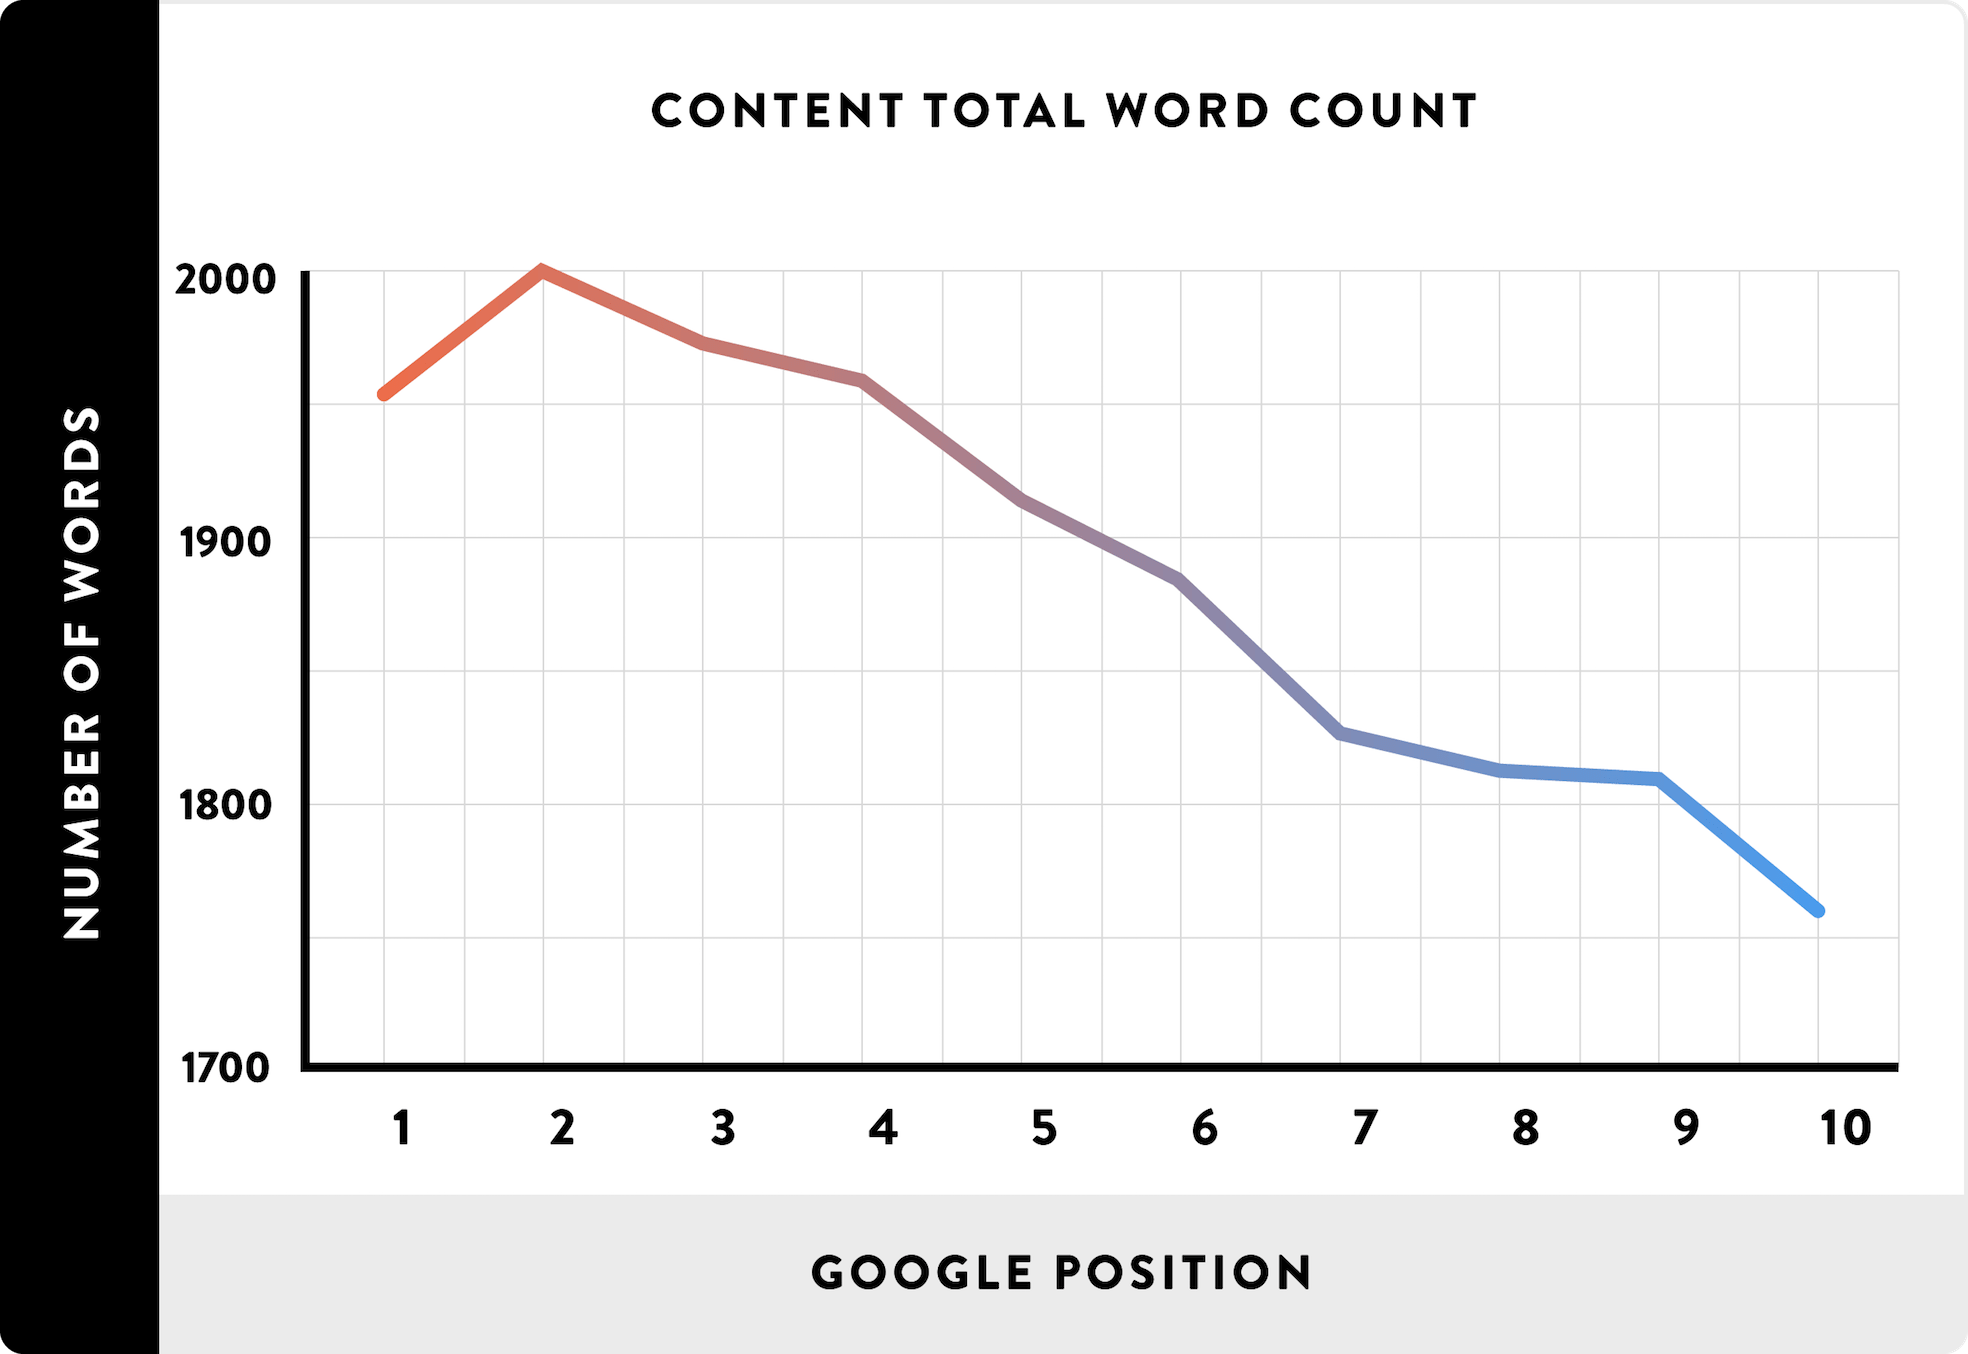 Average word count for Google search results